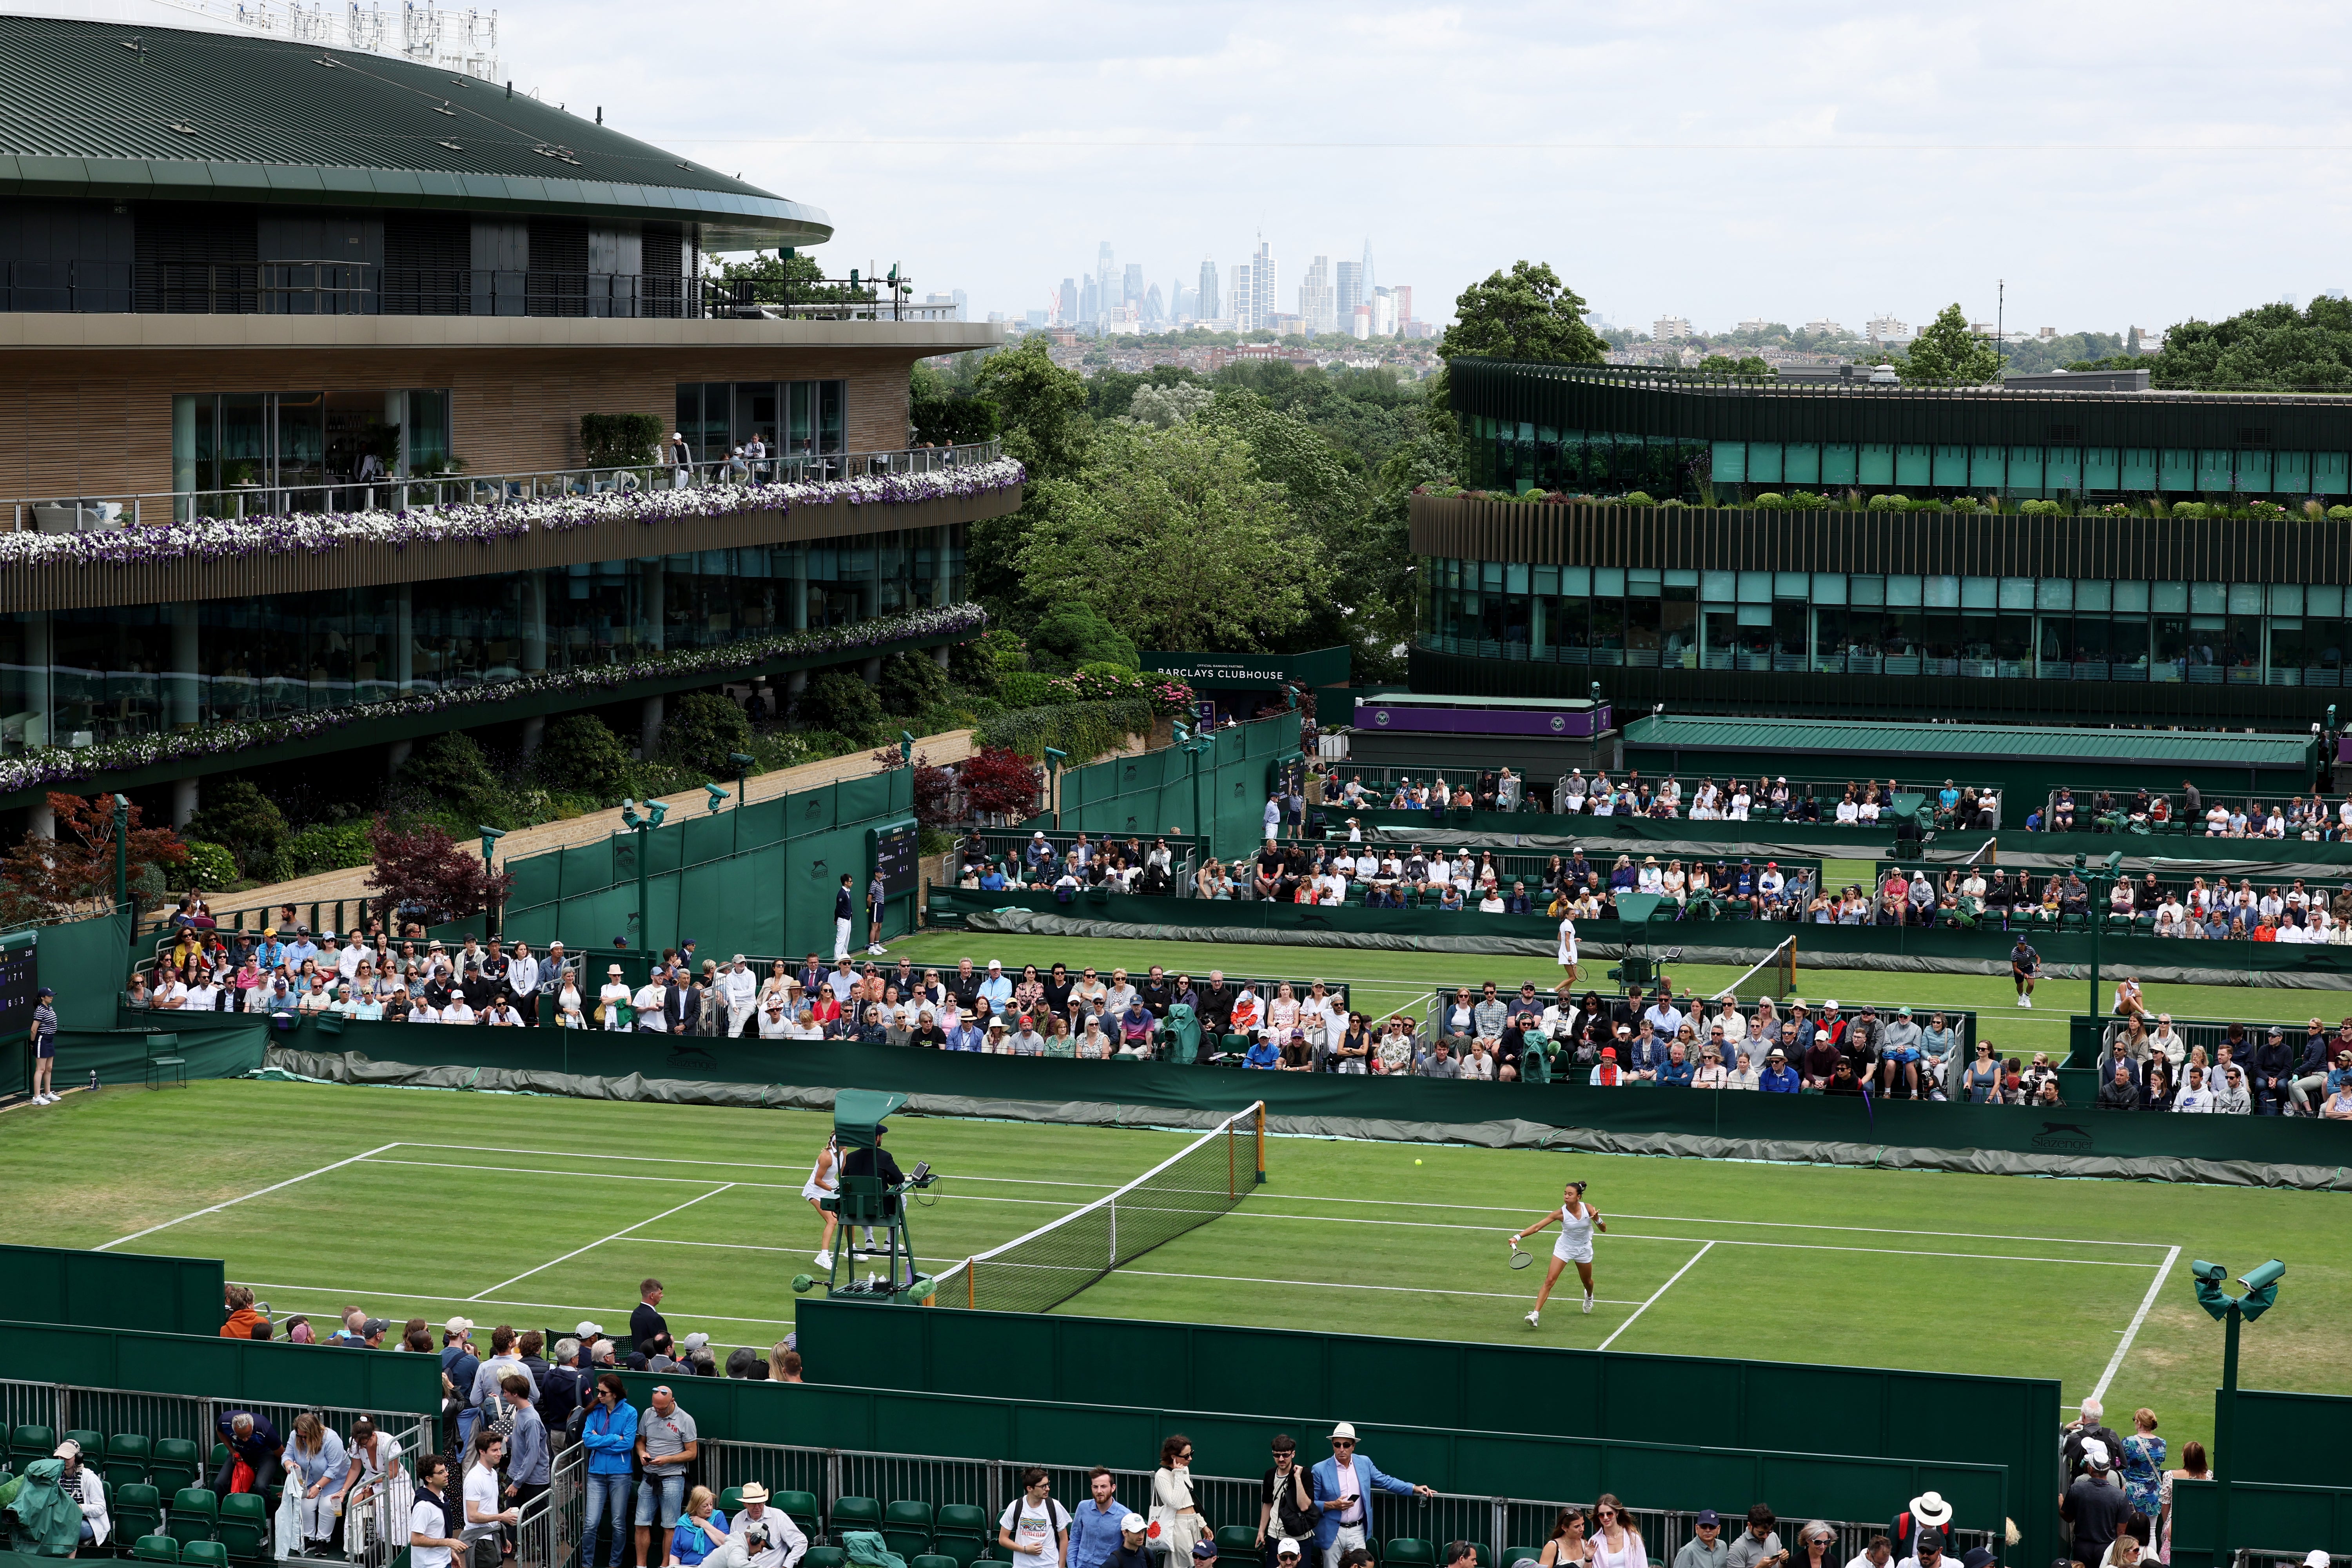 The opening days of Wimbledon have seen its biggest crowds since 2015